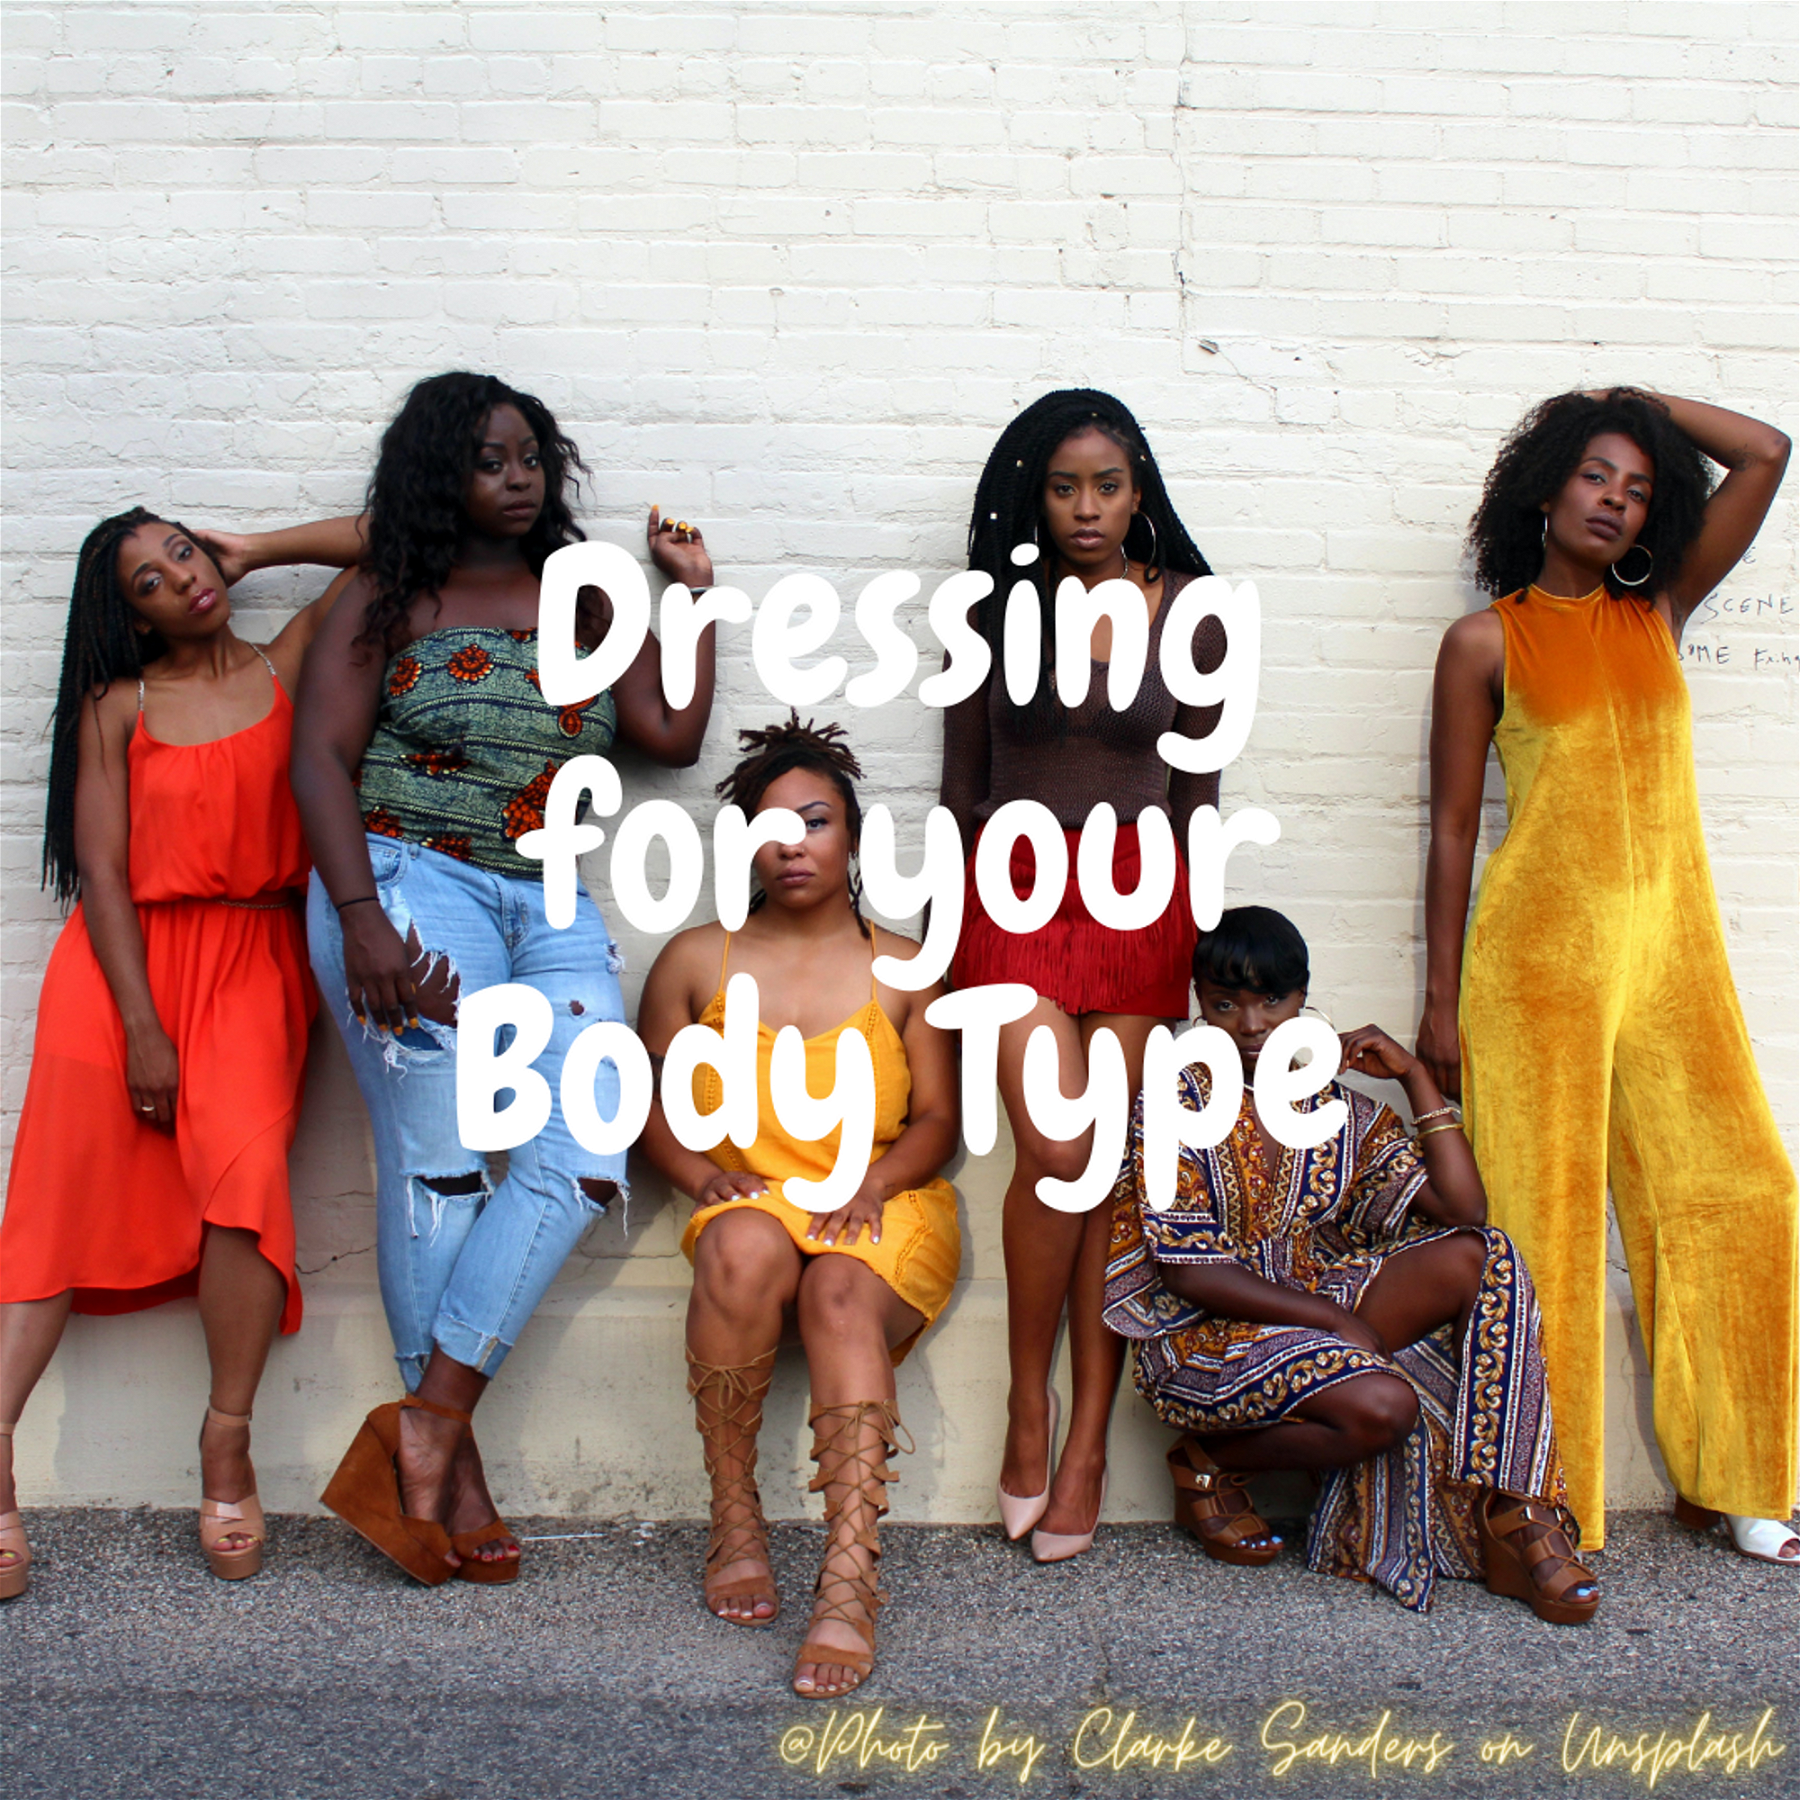 How to dress for your body type? Stylish dressing tips for women